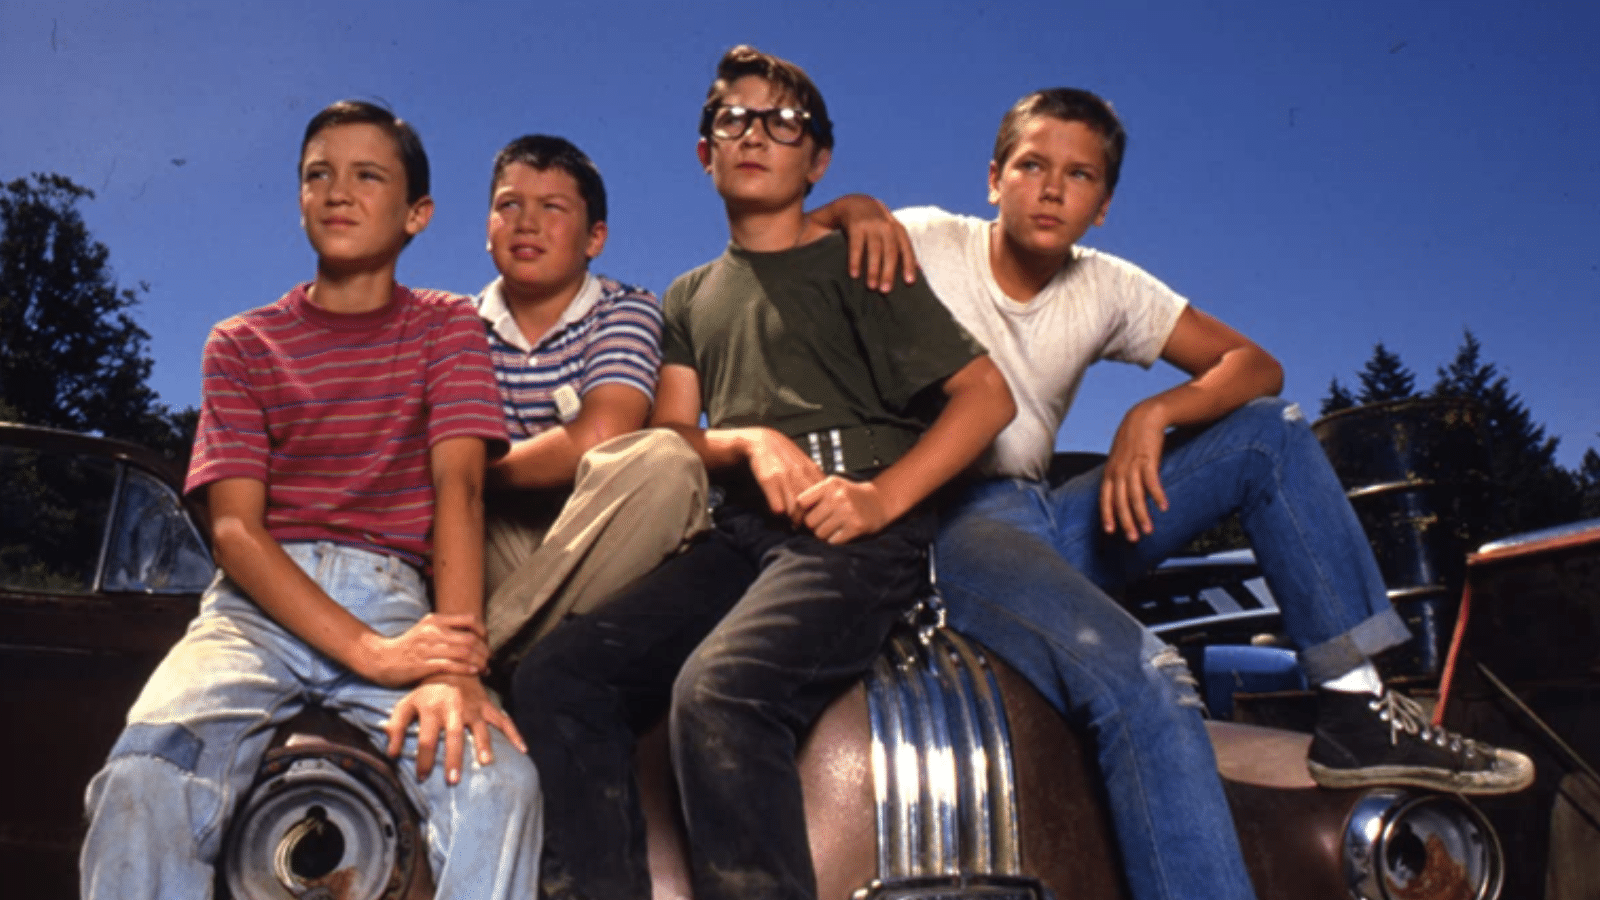 <p>Rob Reiner's phenomenal <em>Stand By Me</em> was mentioned, and rightly so. The teenage cast of River Phoenix, Will Wheaton, and Corey Feldman brings much <a href="https://wealthofgeeks.com/christian-bale-character-transformations/#more-619337" rel="nofollow noopener">humanity</a> to an already great novella.</p> <p>The child actors helped elevate the film to the classic status it is today.</p> <p>Only true fans know that Stephen King also wrote <em>The Shawshank Redemption </em>since it was a deviation from his horror-based novels.</p> <p>The acclaimed movie is based on the novella <em>Rita Hayworth and Shawshank Redemption.</em></p>